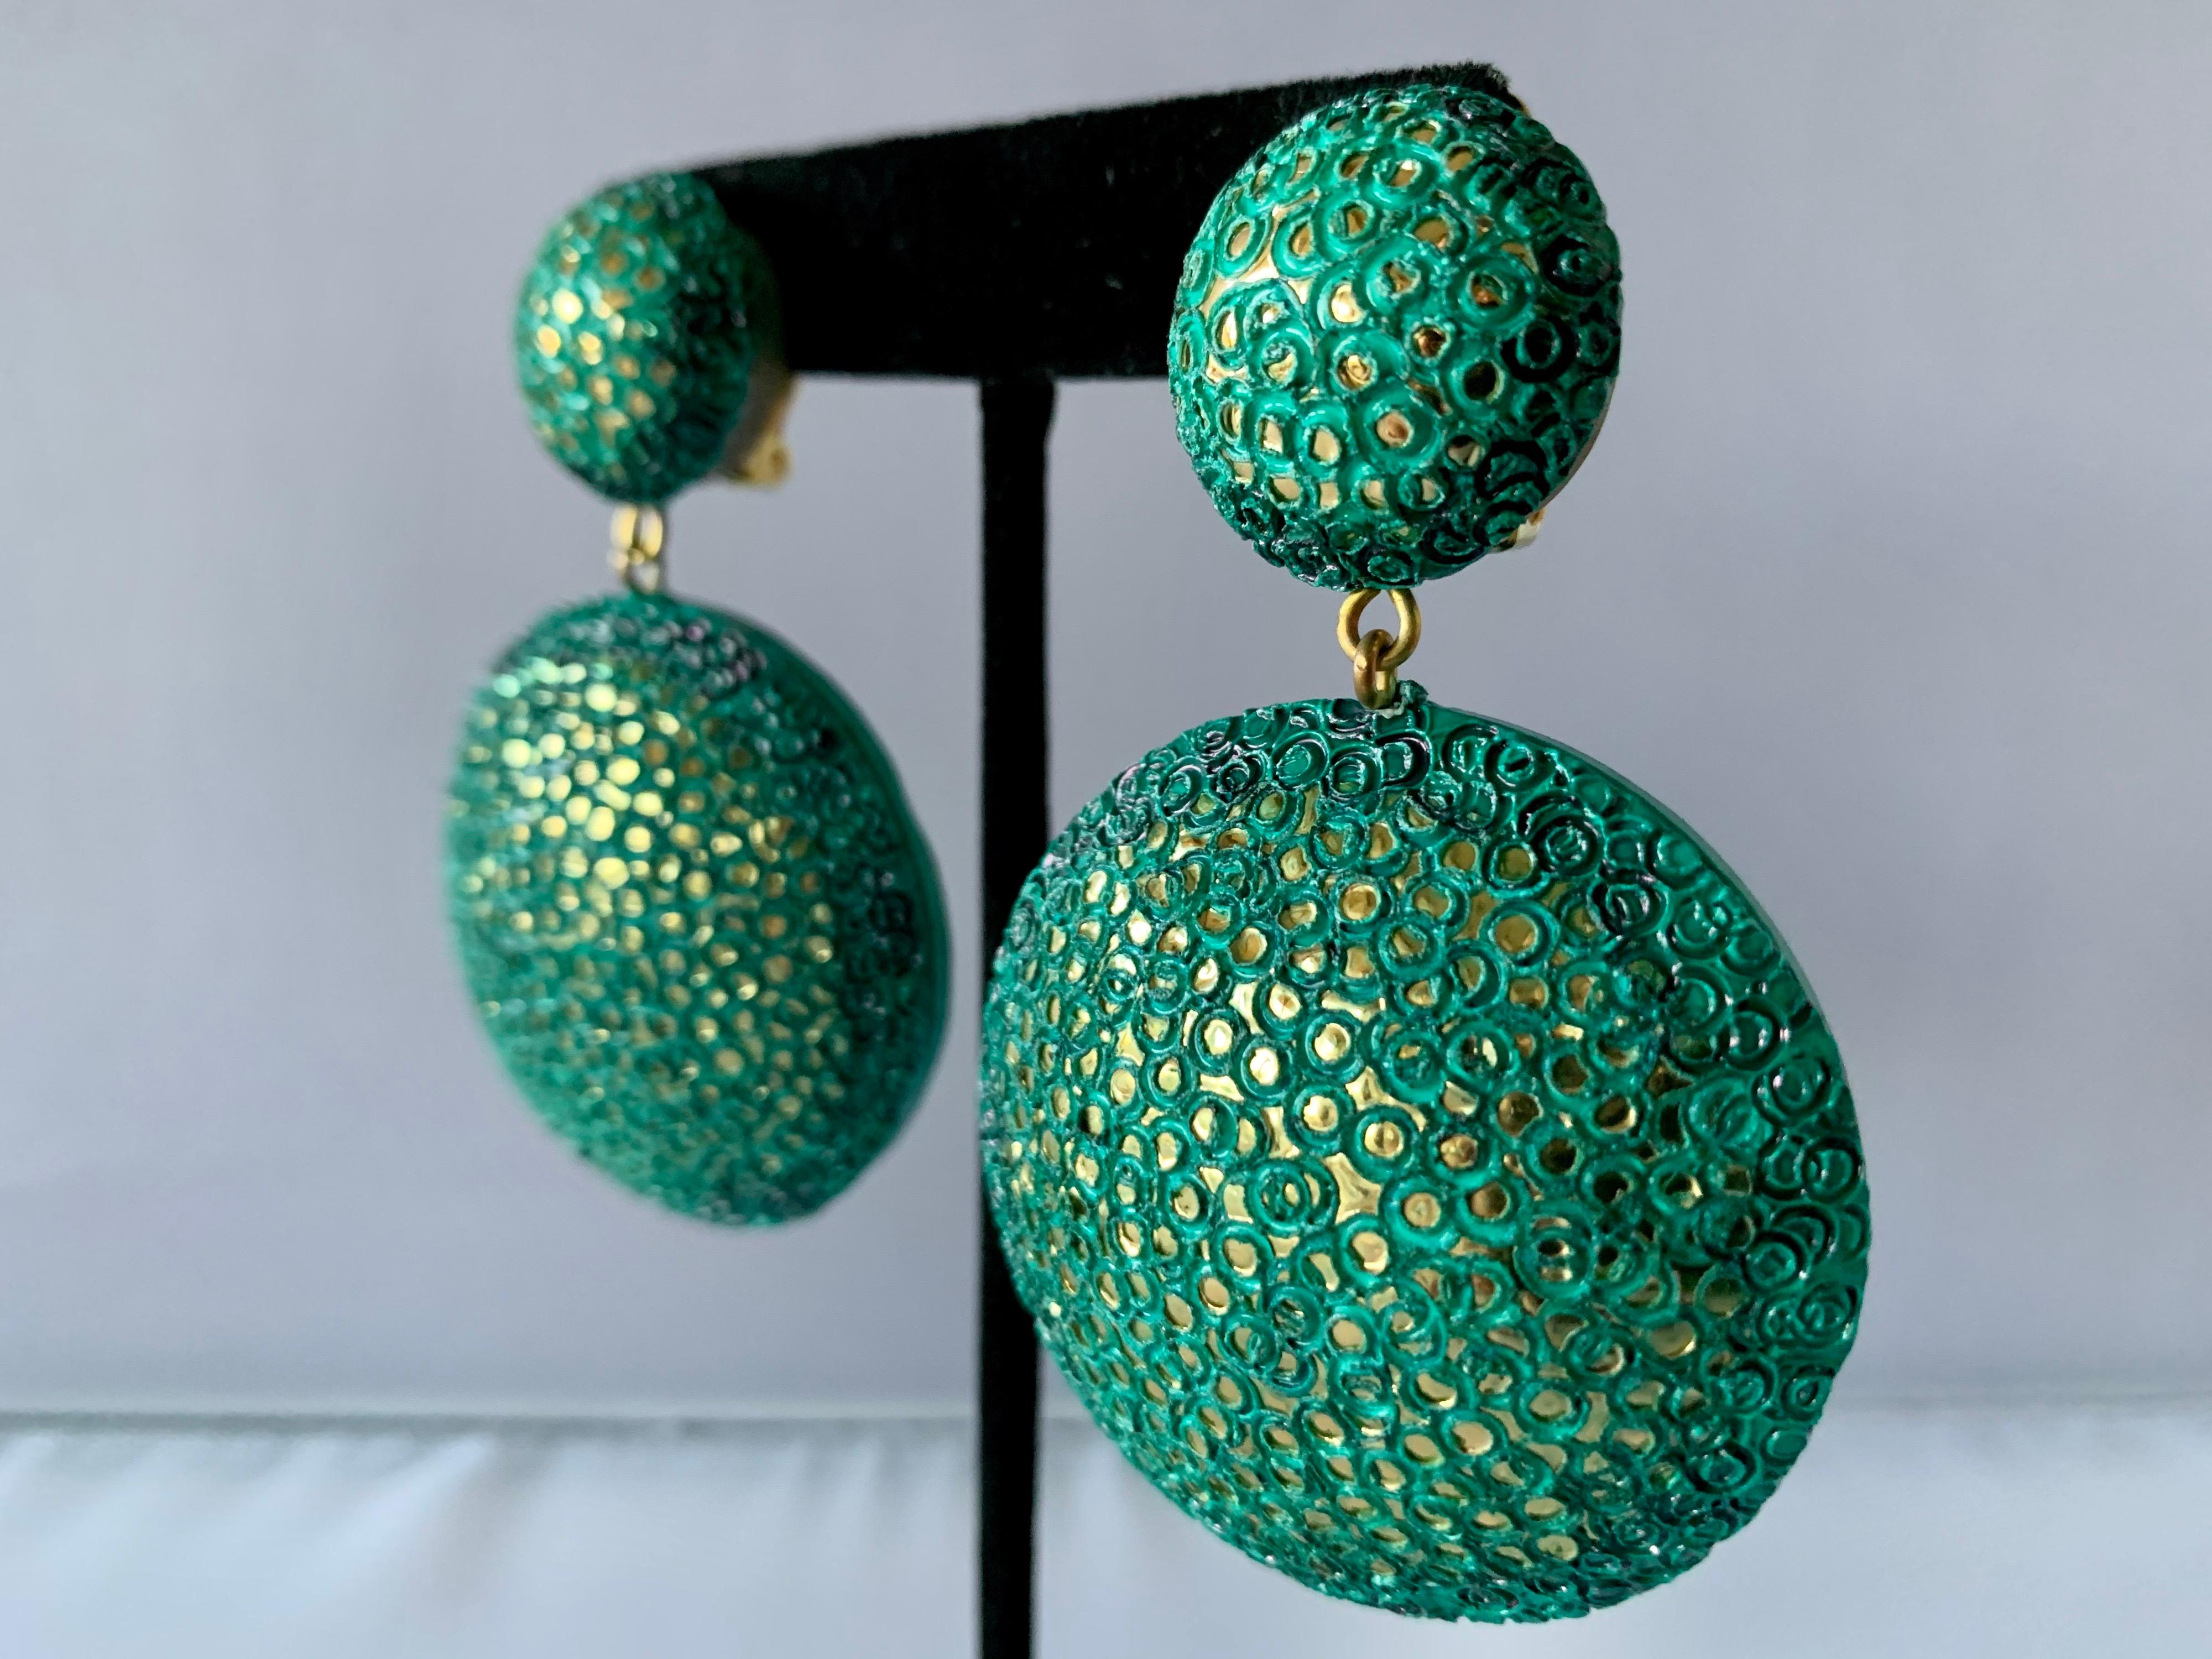 Light and easy to wear, these handmade artisanal clip-on earrings were made in Paris France. The lightweight clip-on earrings feature molded disk segments of enameline (enamel and resin composite) in electric turquoise color. The earrings are